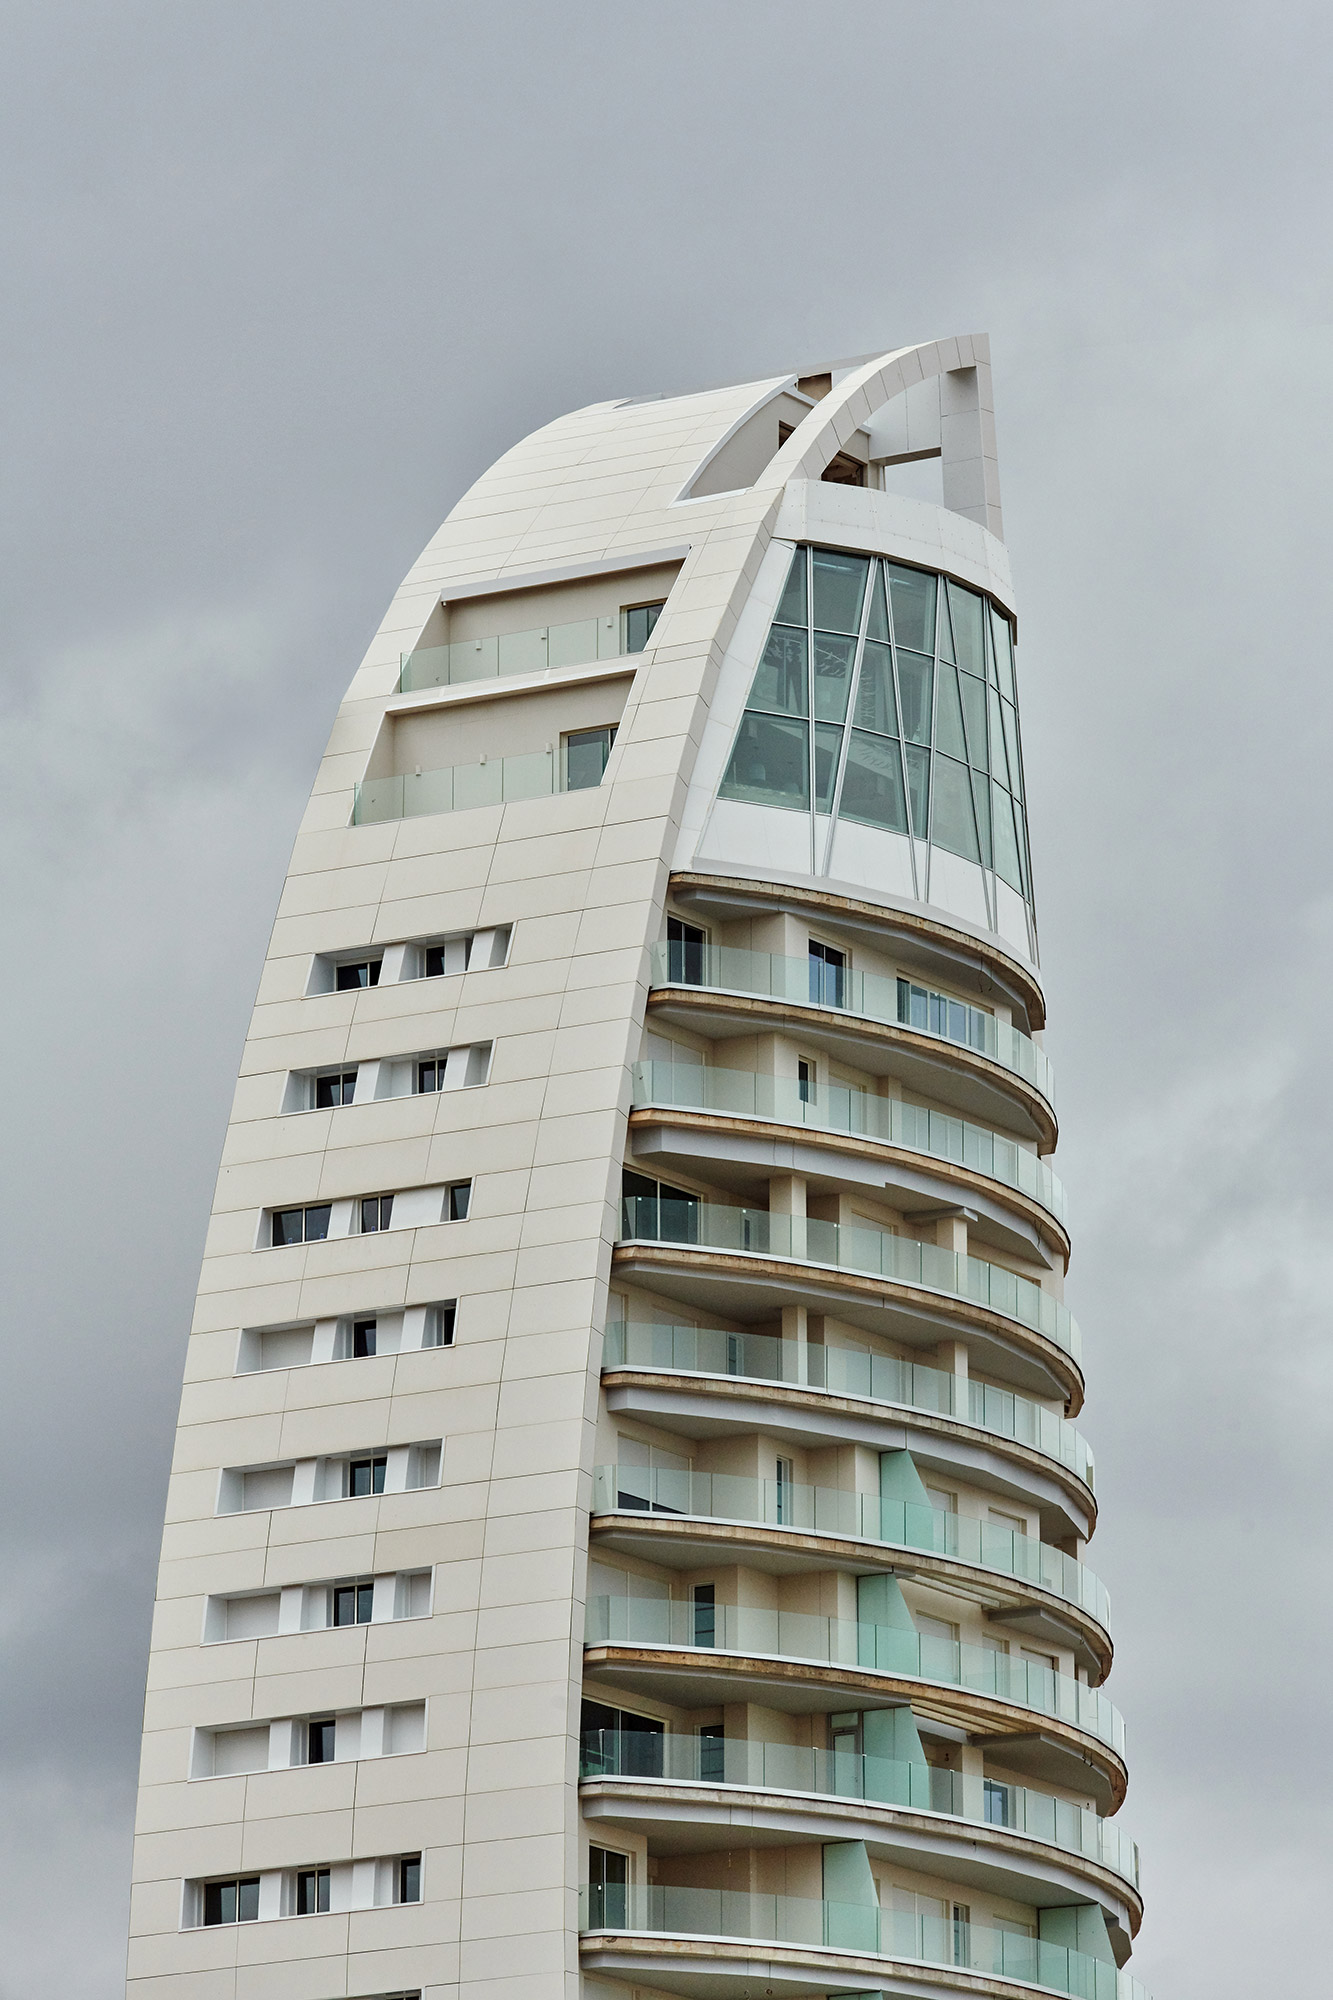 Image of delfin tower benidorm 10 in Dekton presents the world’s first curved and ventilated façade made of ultra-compact stone - Cosentino